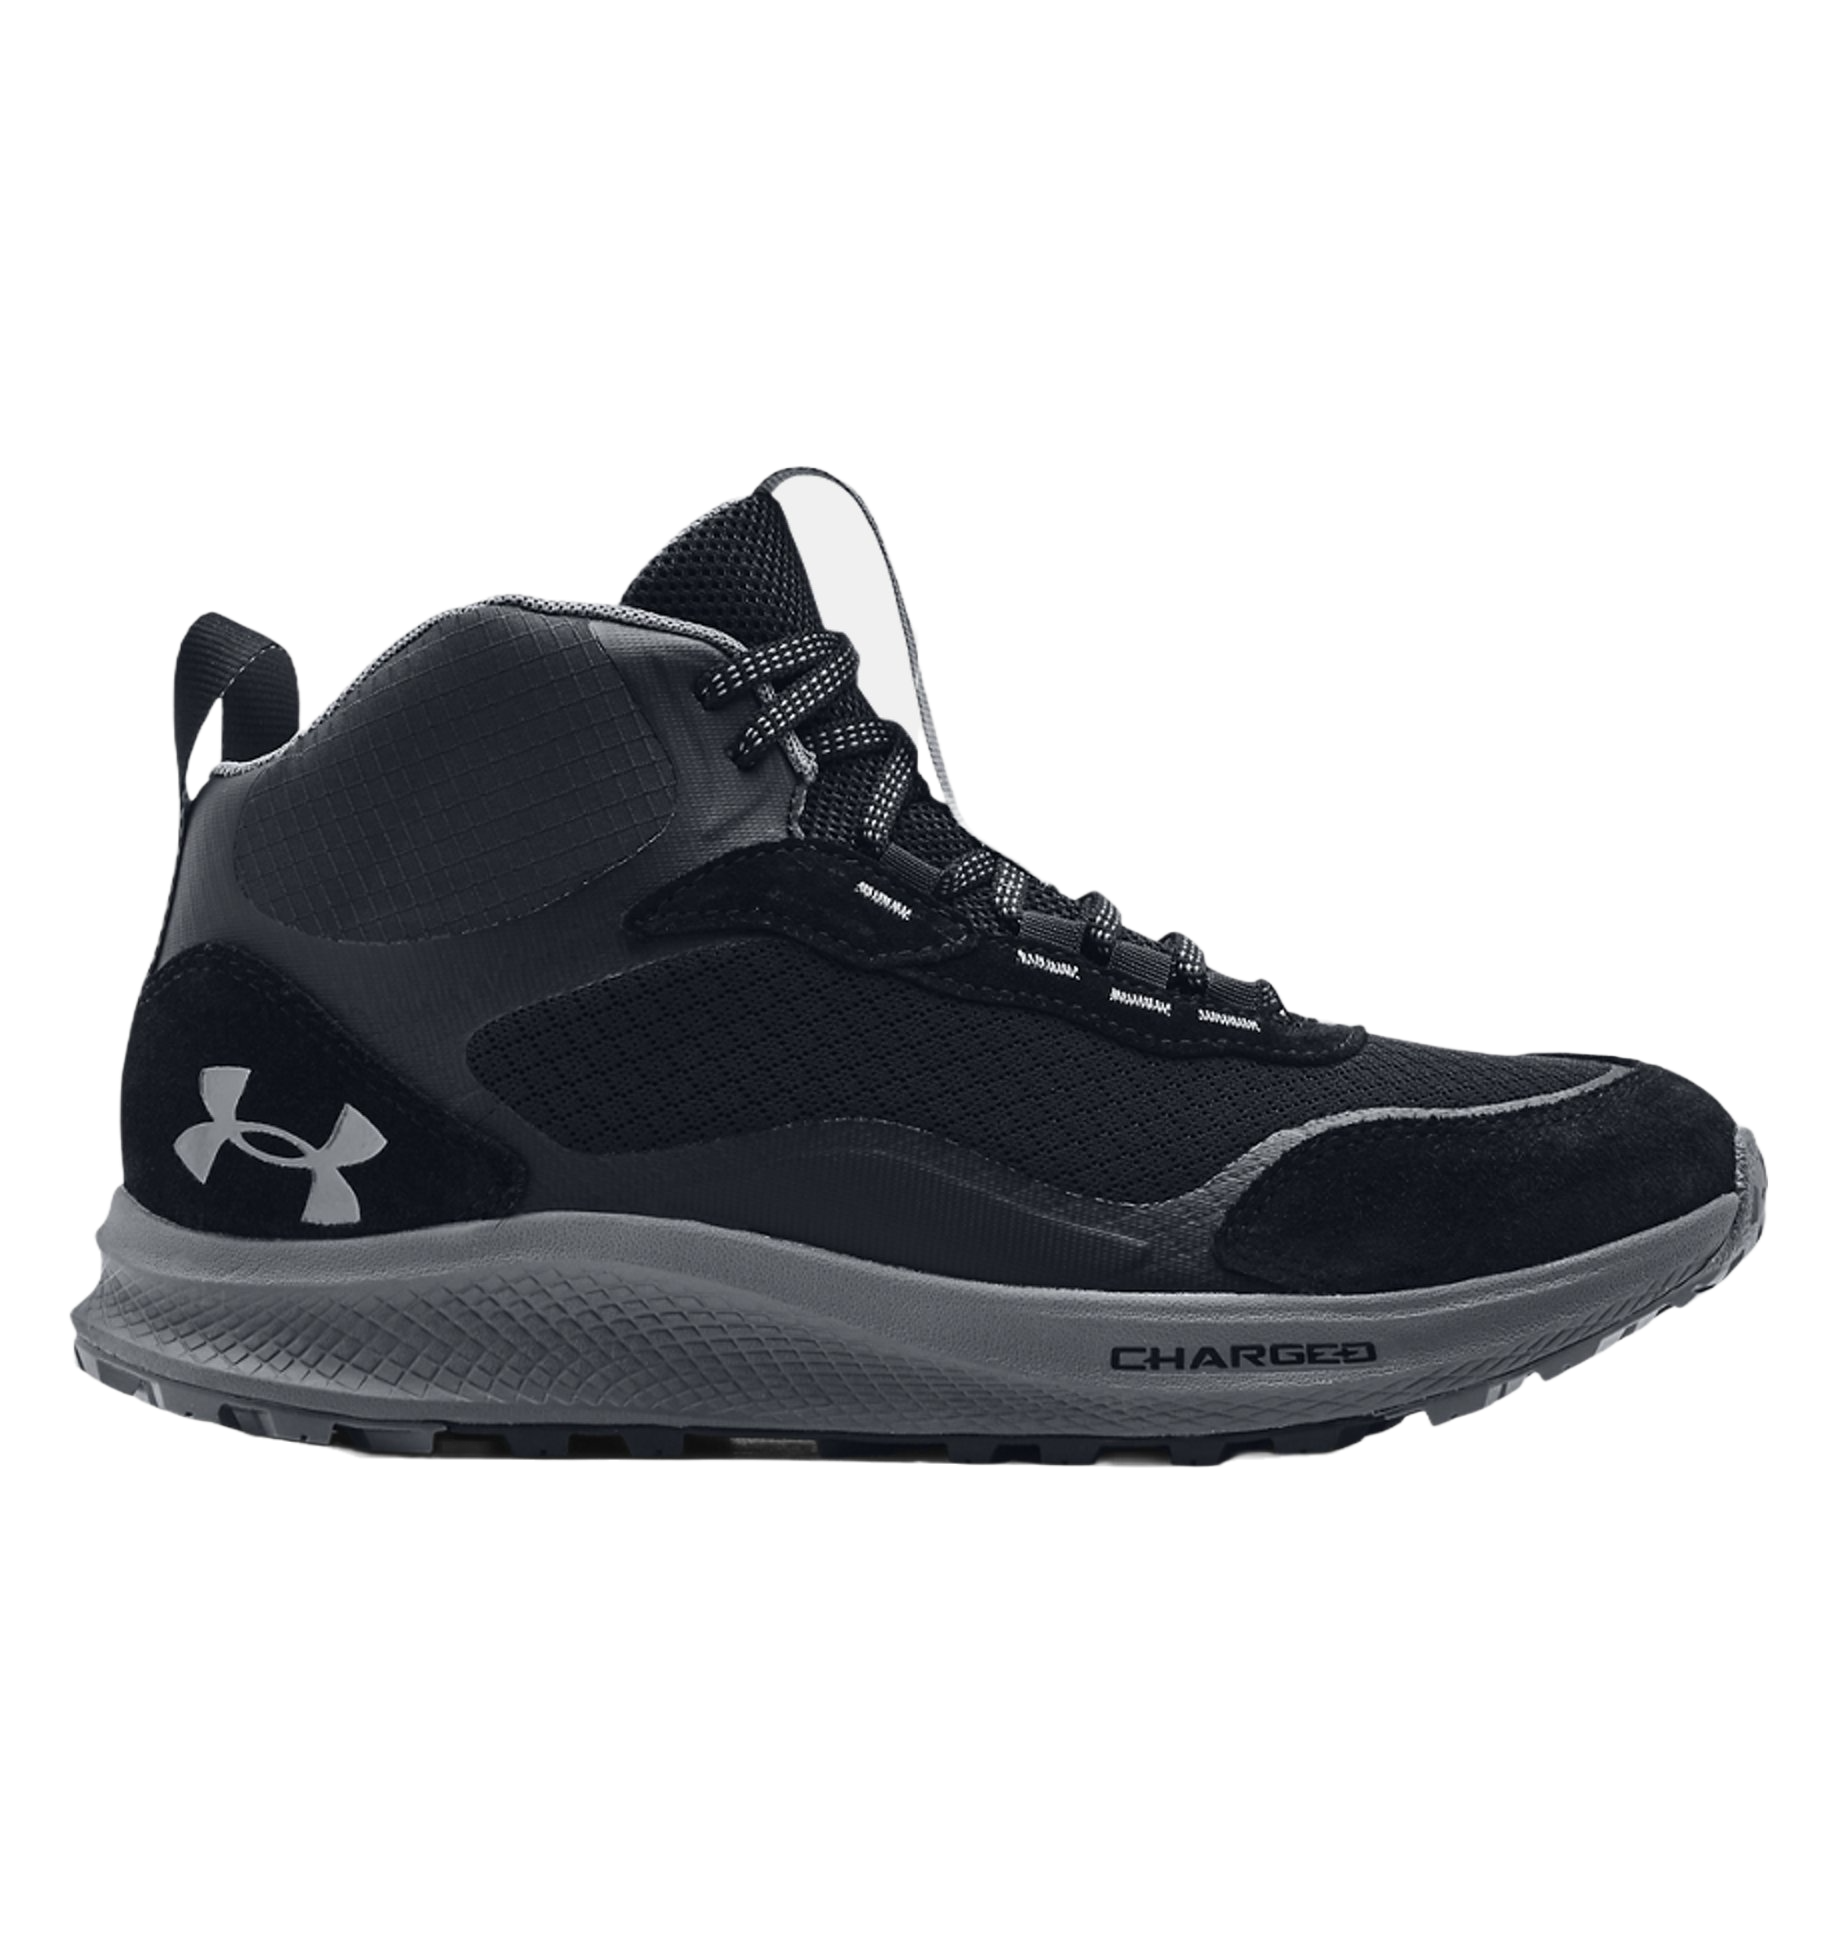 Under Armour Charged Bandit Trail 2 Mid - Mens